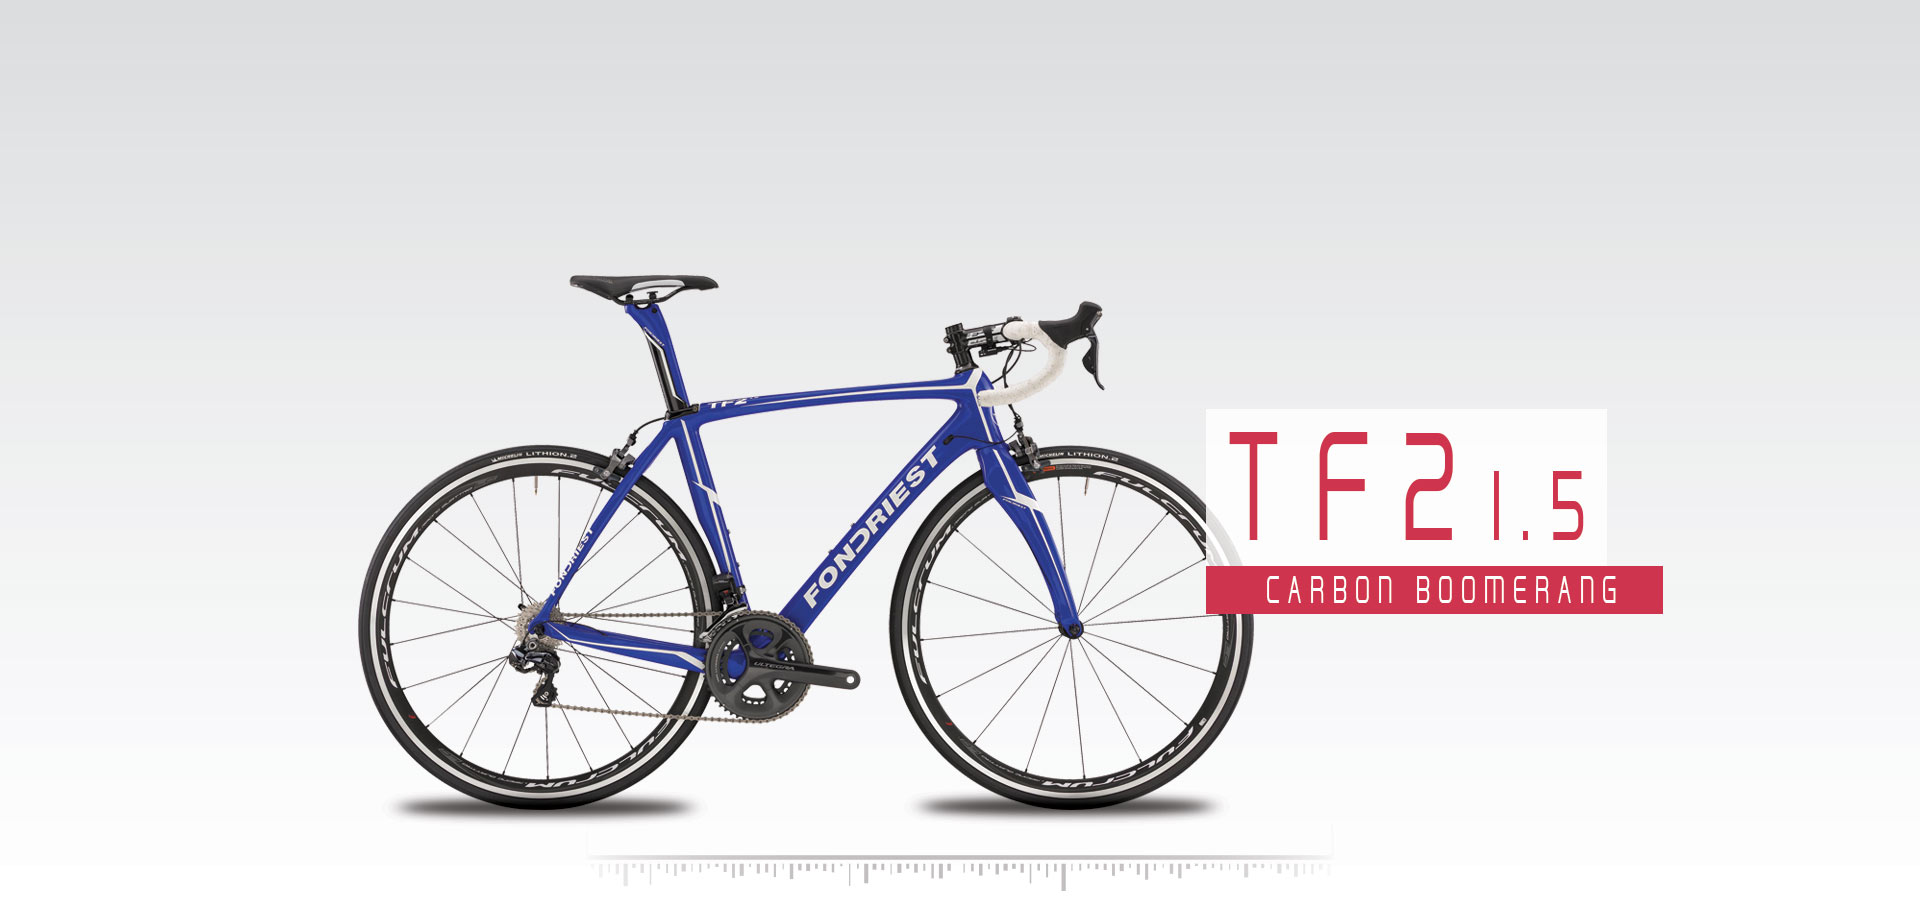 Italian World Champion Brand Fondriest will round up our solid road bike selection.